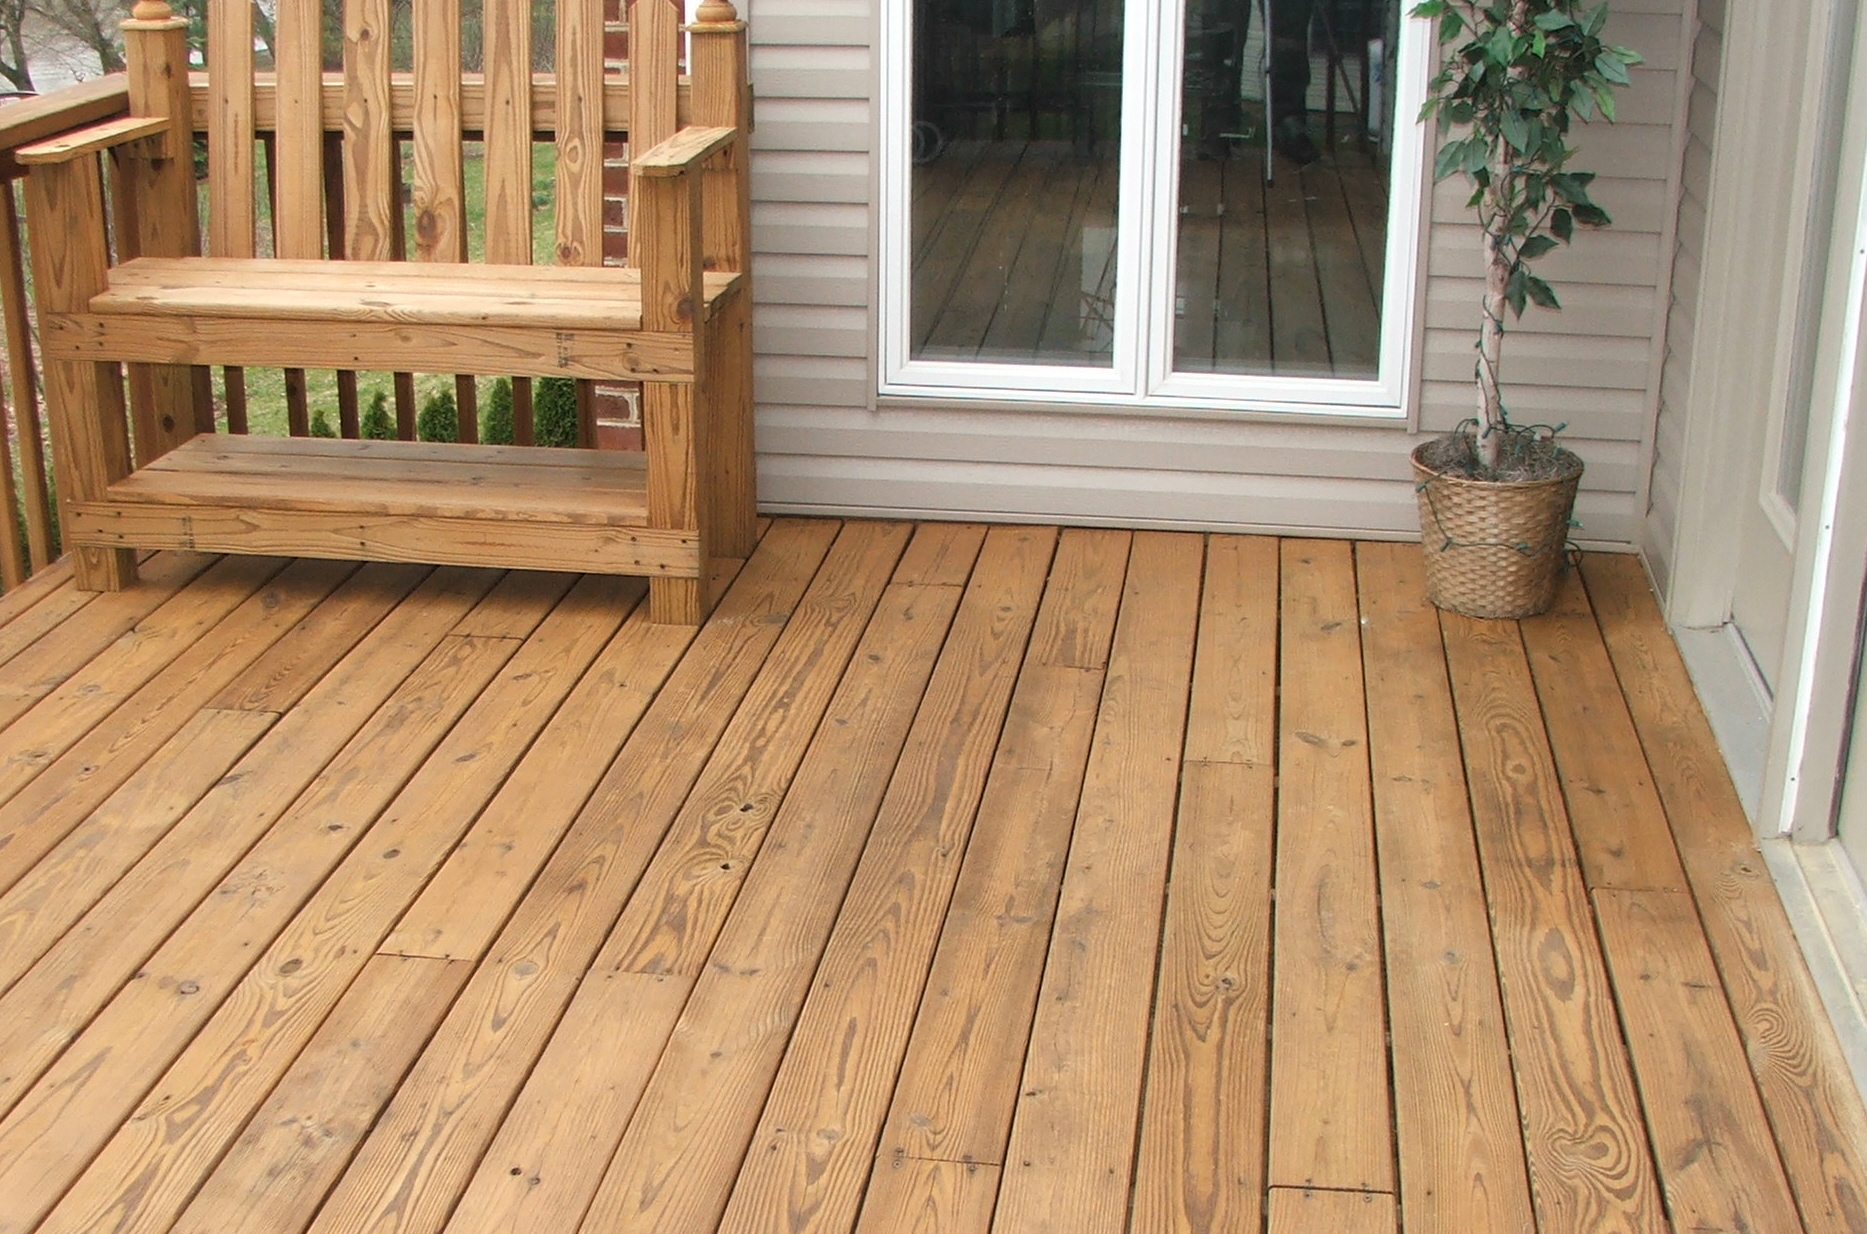 Wood deck after pressure washing and seal/staining protection using a cedar toner product. Typical three(3) year preformance.